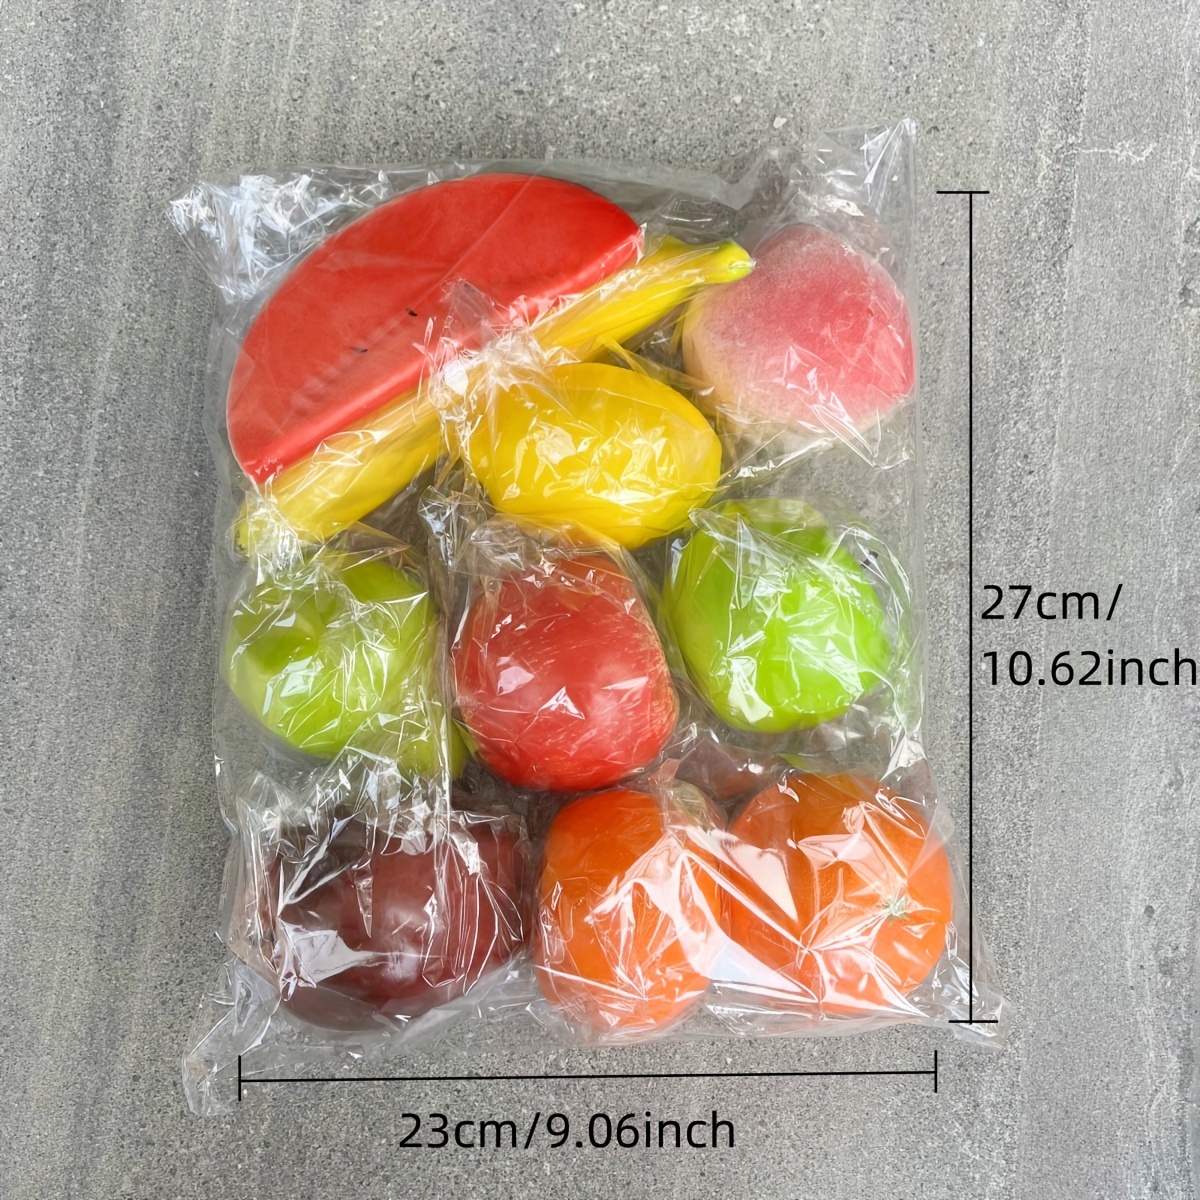 10pcs artificial fruit simulation fruits fake fruitvegetable model photography props toys storefront display crafts spring realistic plastic fruit decor for weddings parties and home decor perfect for cake shooting props and holiday decor